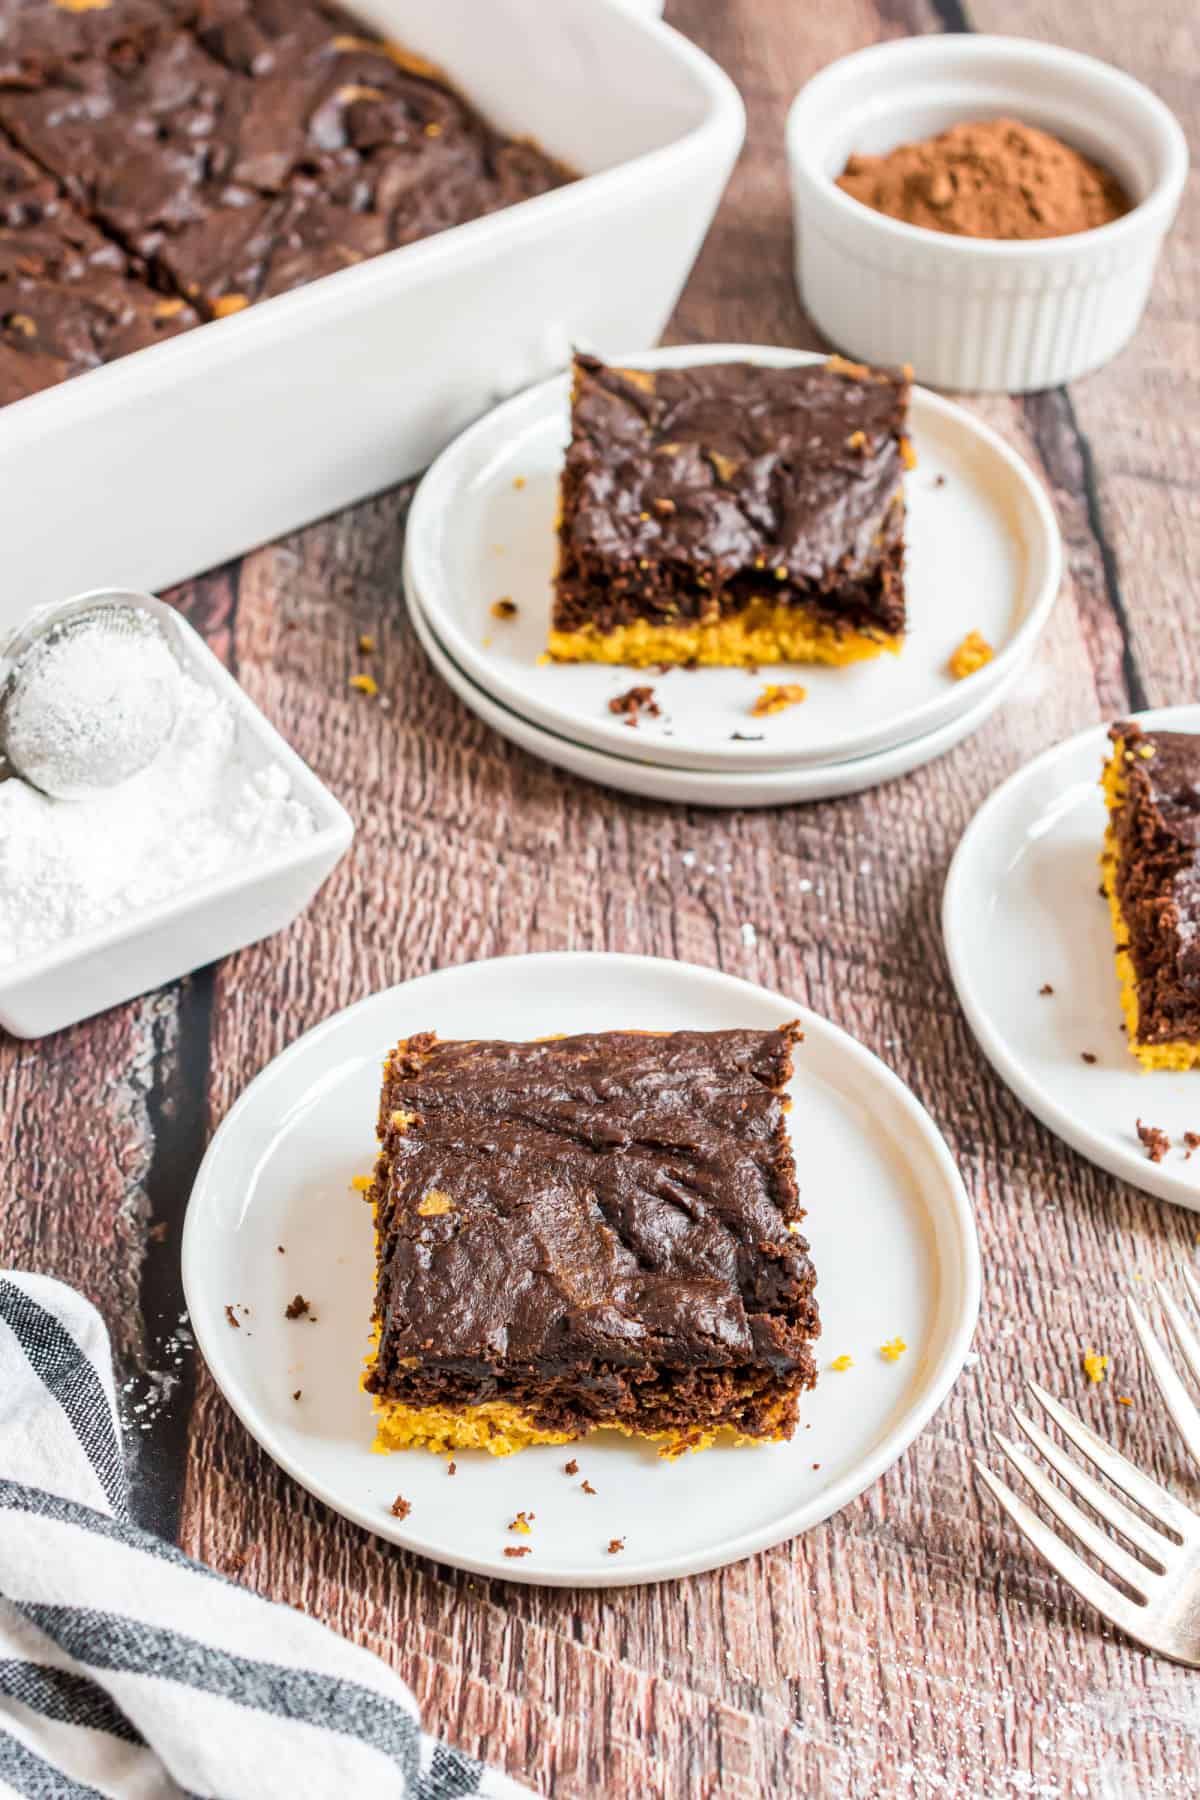 Two slices of chocolate pumpkin cake on white dessert plates.